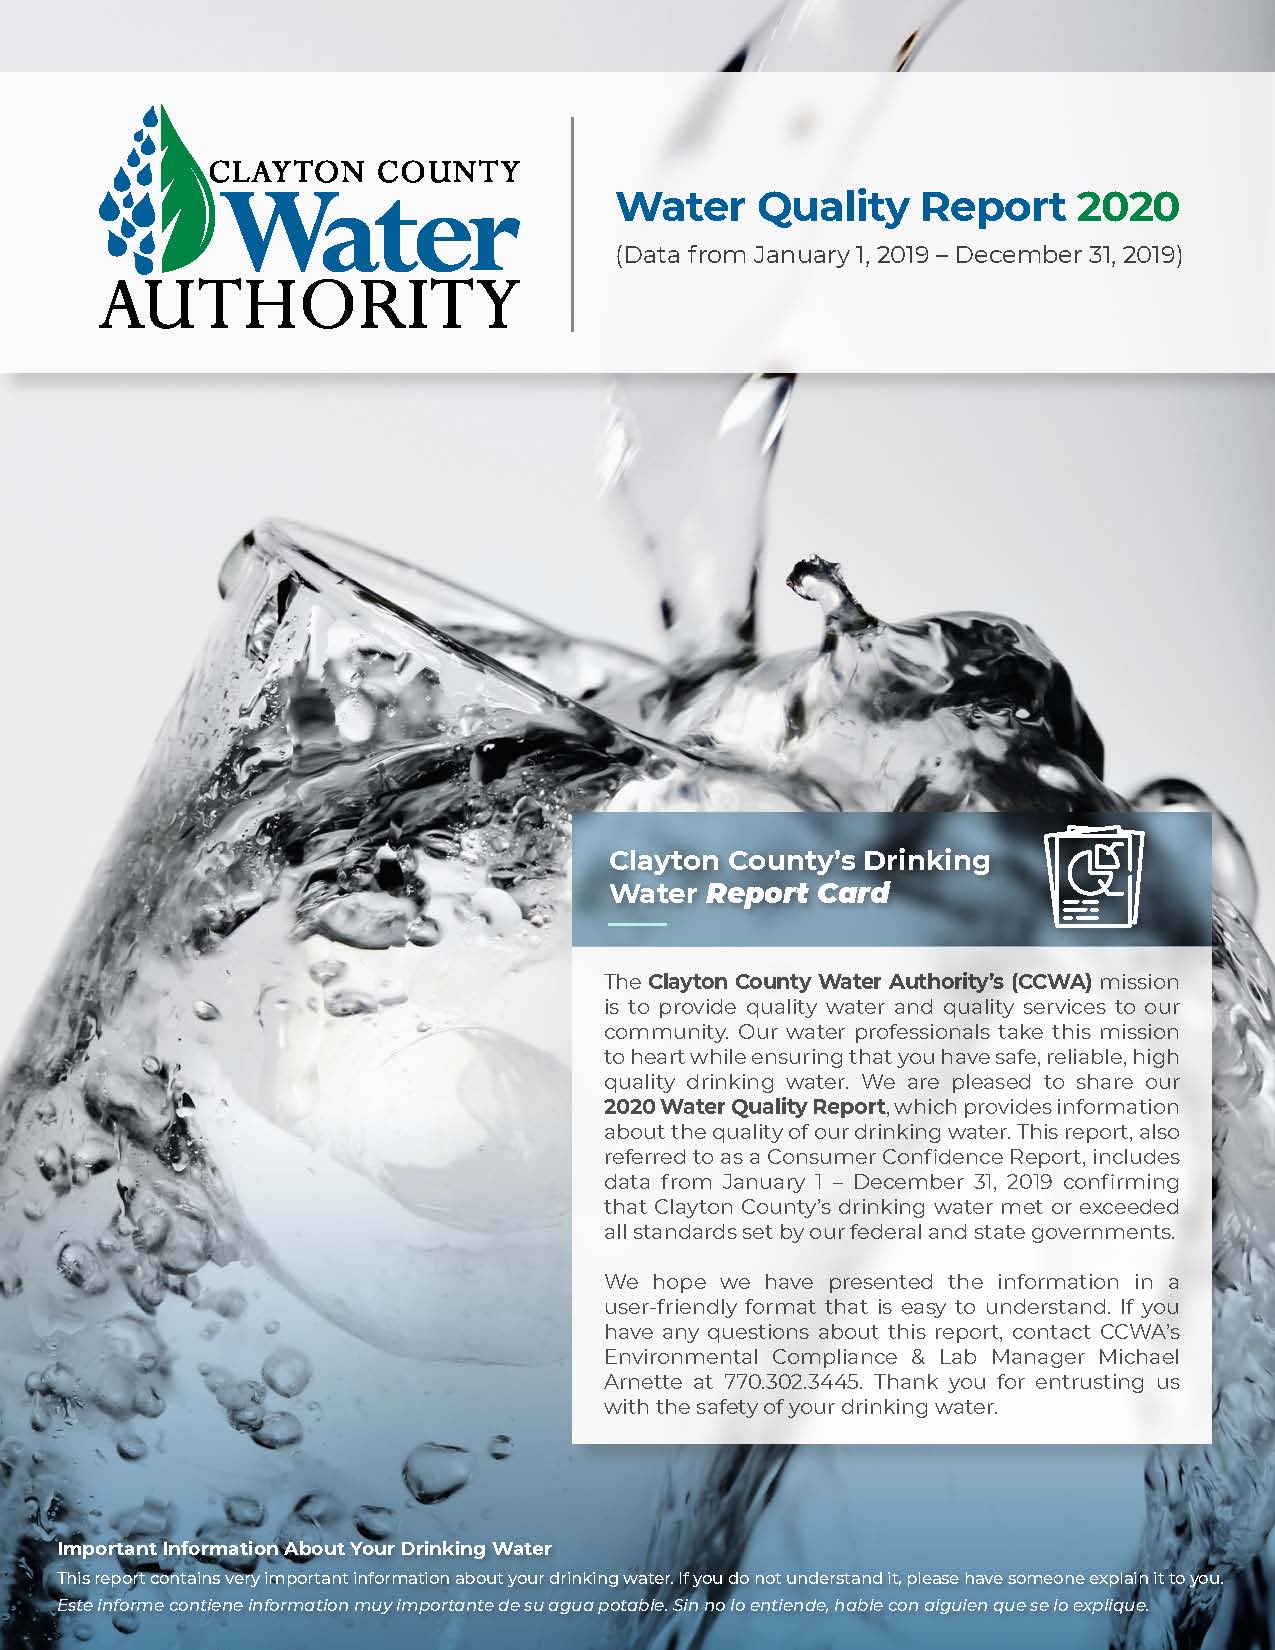 Annual Water Quality Report Shows Drinking Water Met Or Exceeded All